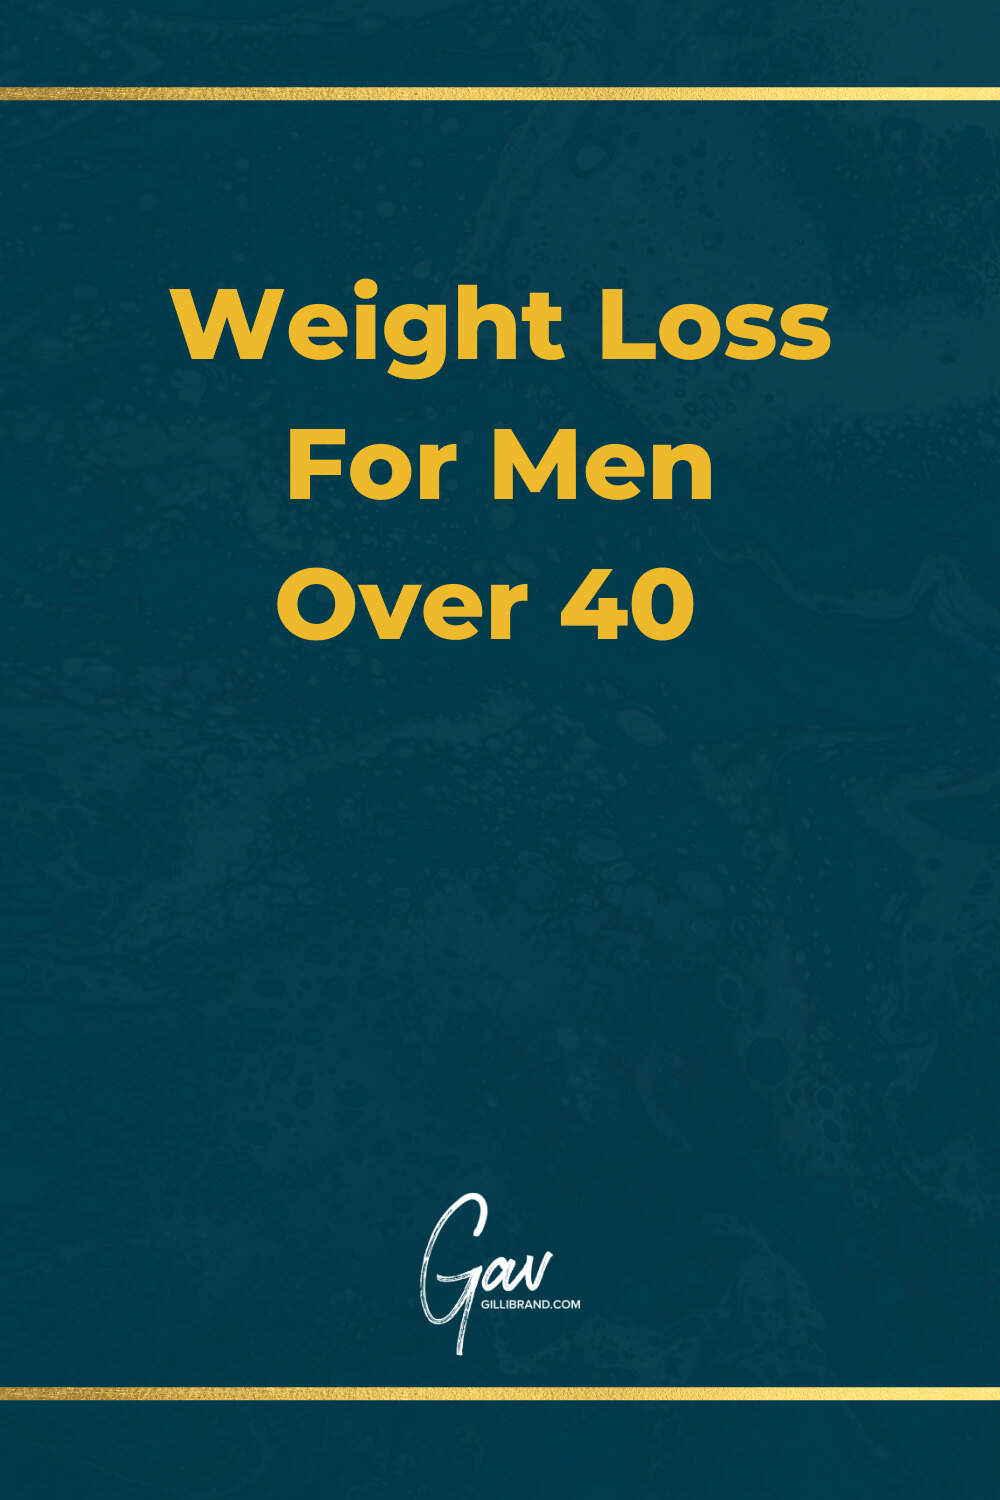 Blog Cover For Weight Loss for men over 40 article